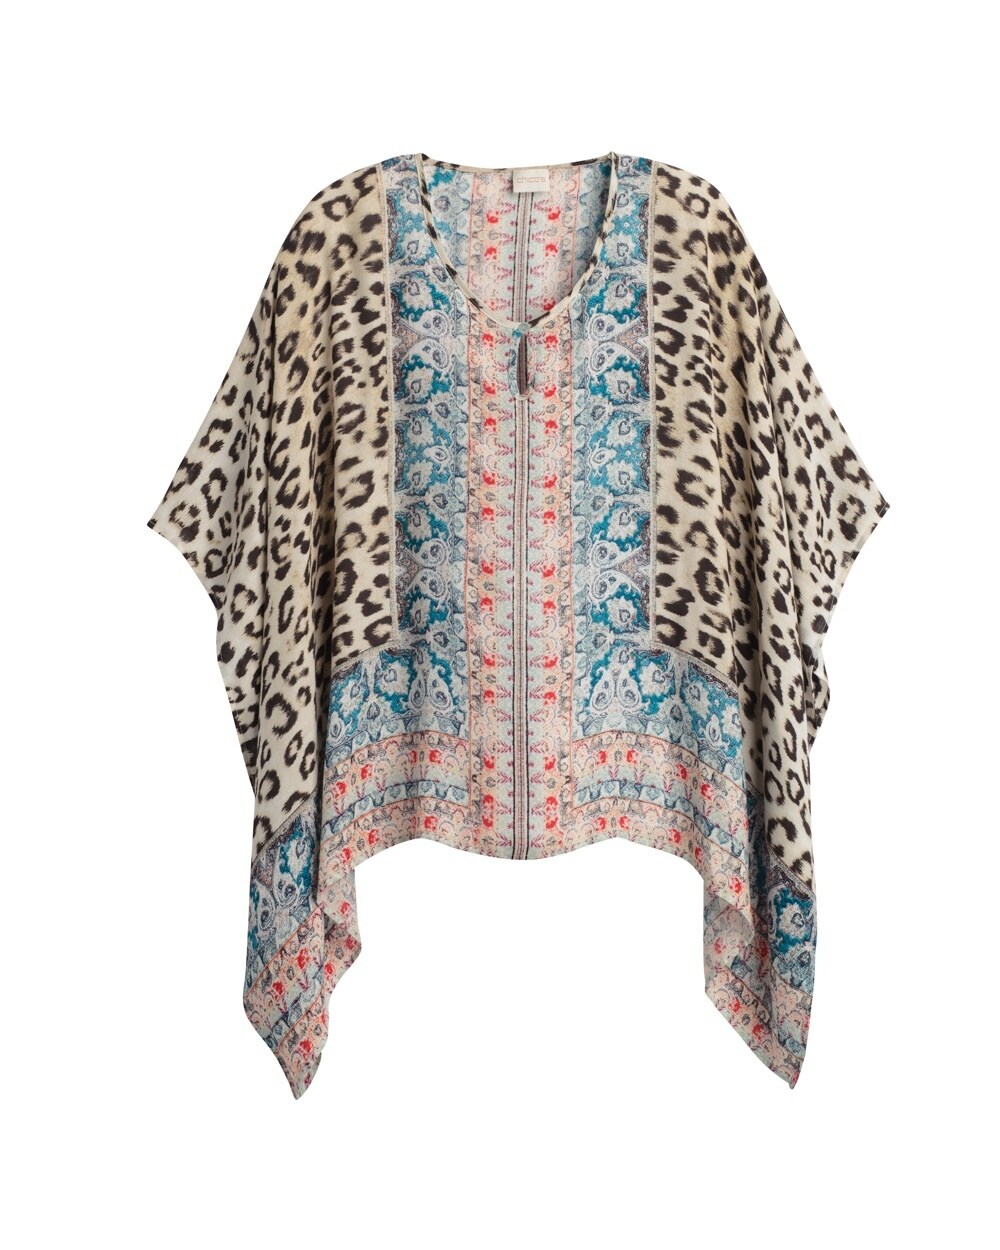 Tapestry Striped Poncho - Women's New Clothing - Tops, Bottoms ...